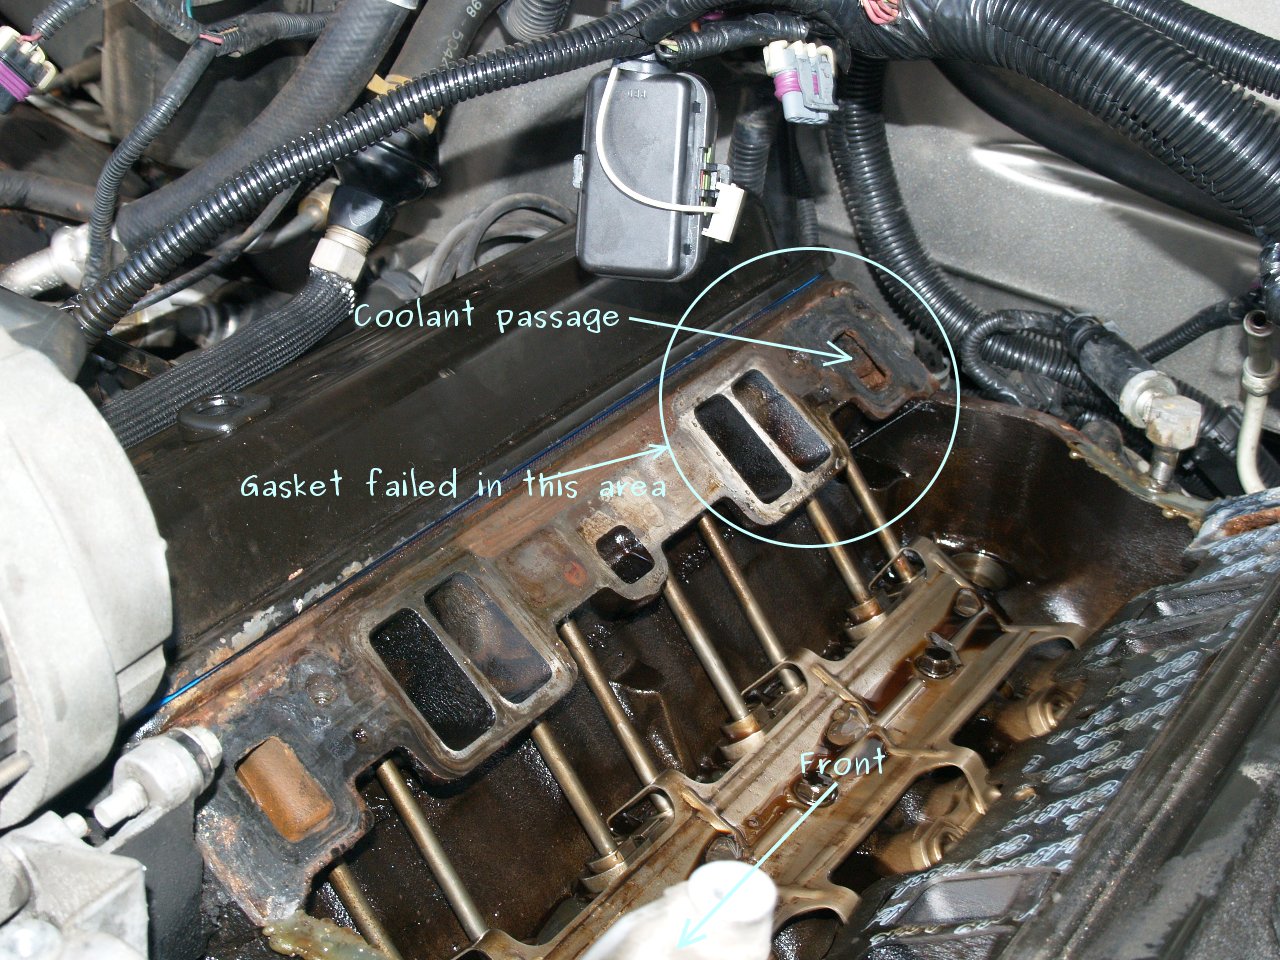 See P0518 in engine